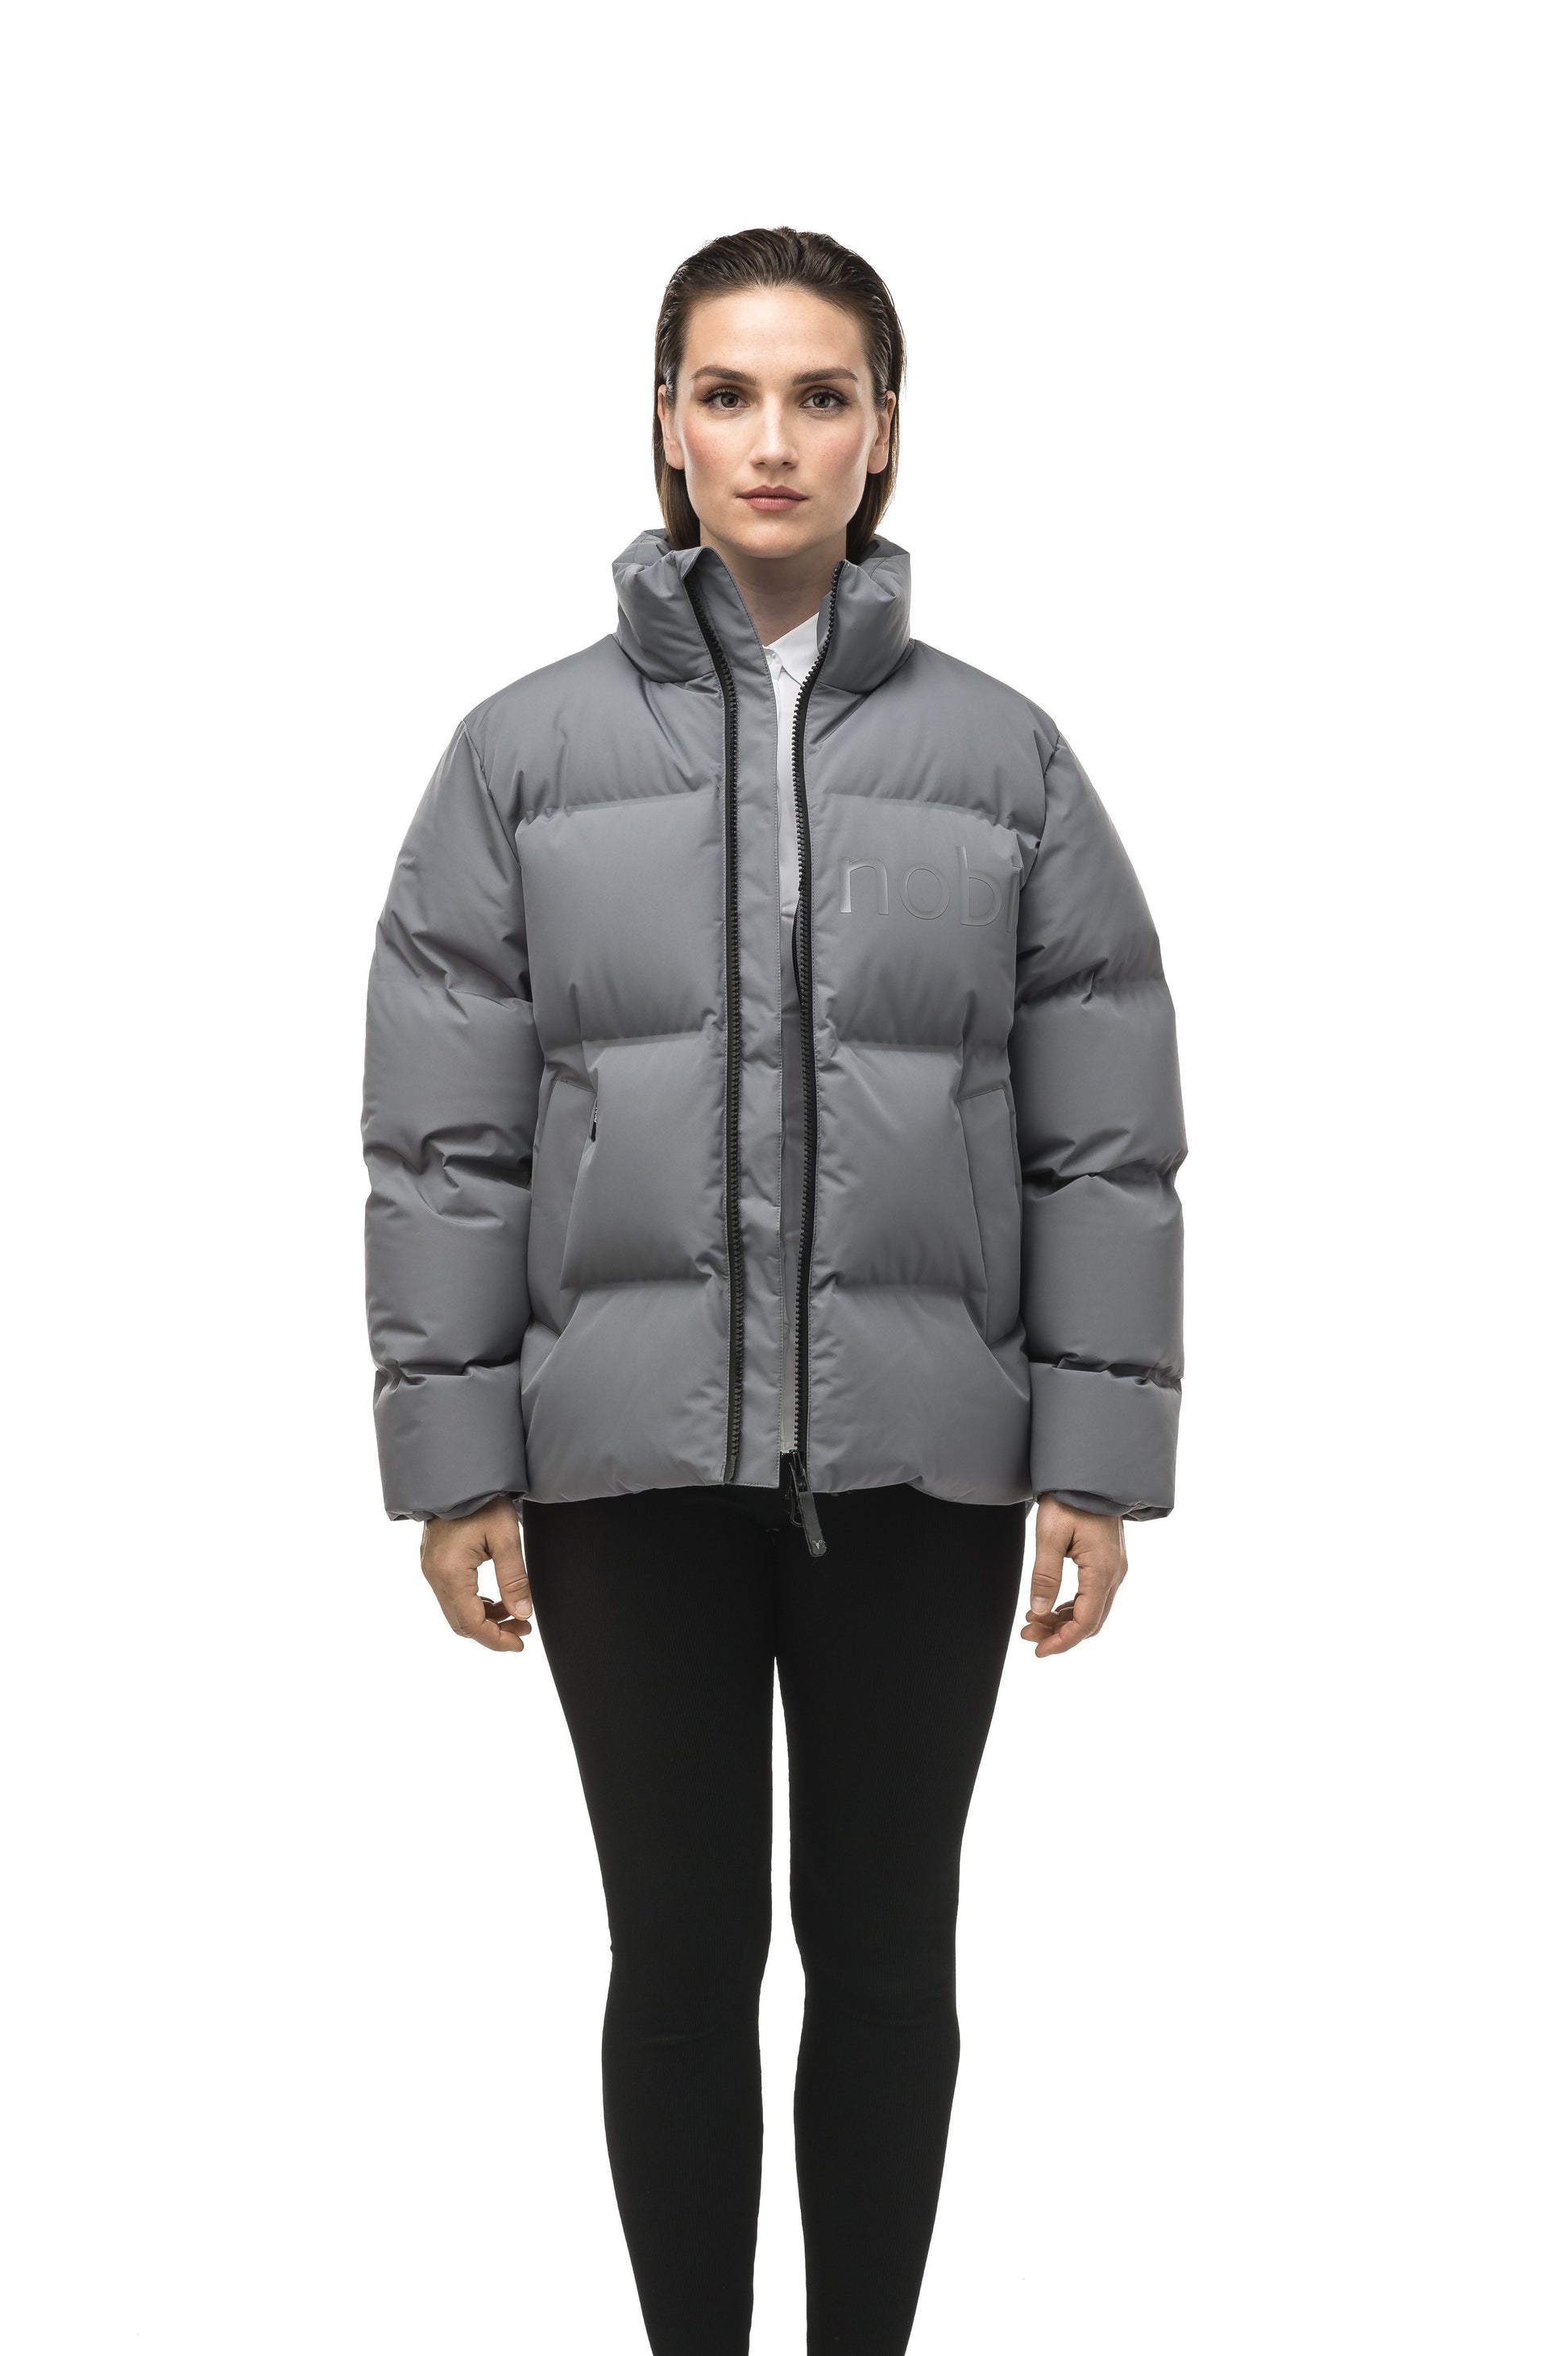 Women's puffer jacket with a minimalist modern design; featuring graphic details like oversized tonal branding, an exposed zipper, and seamless puffer channels to lock in the Premium Canadian Origin White Duck Down in Concrete color